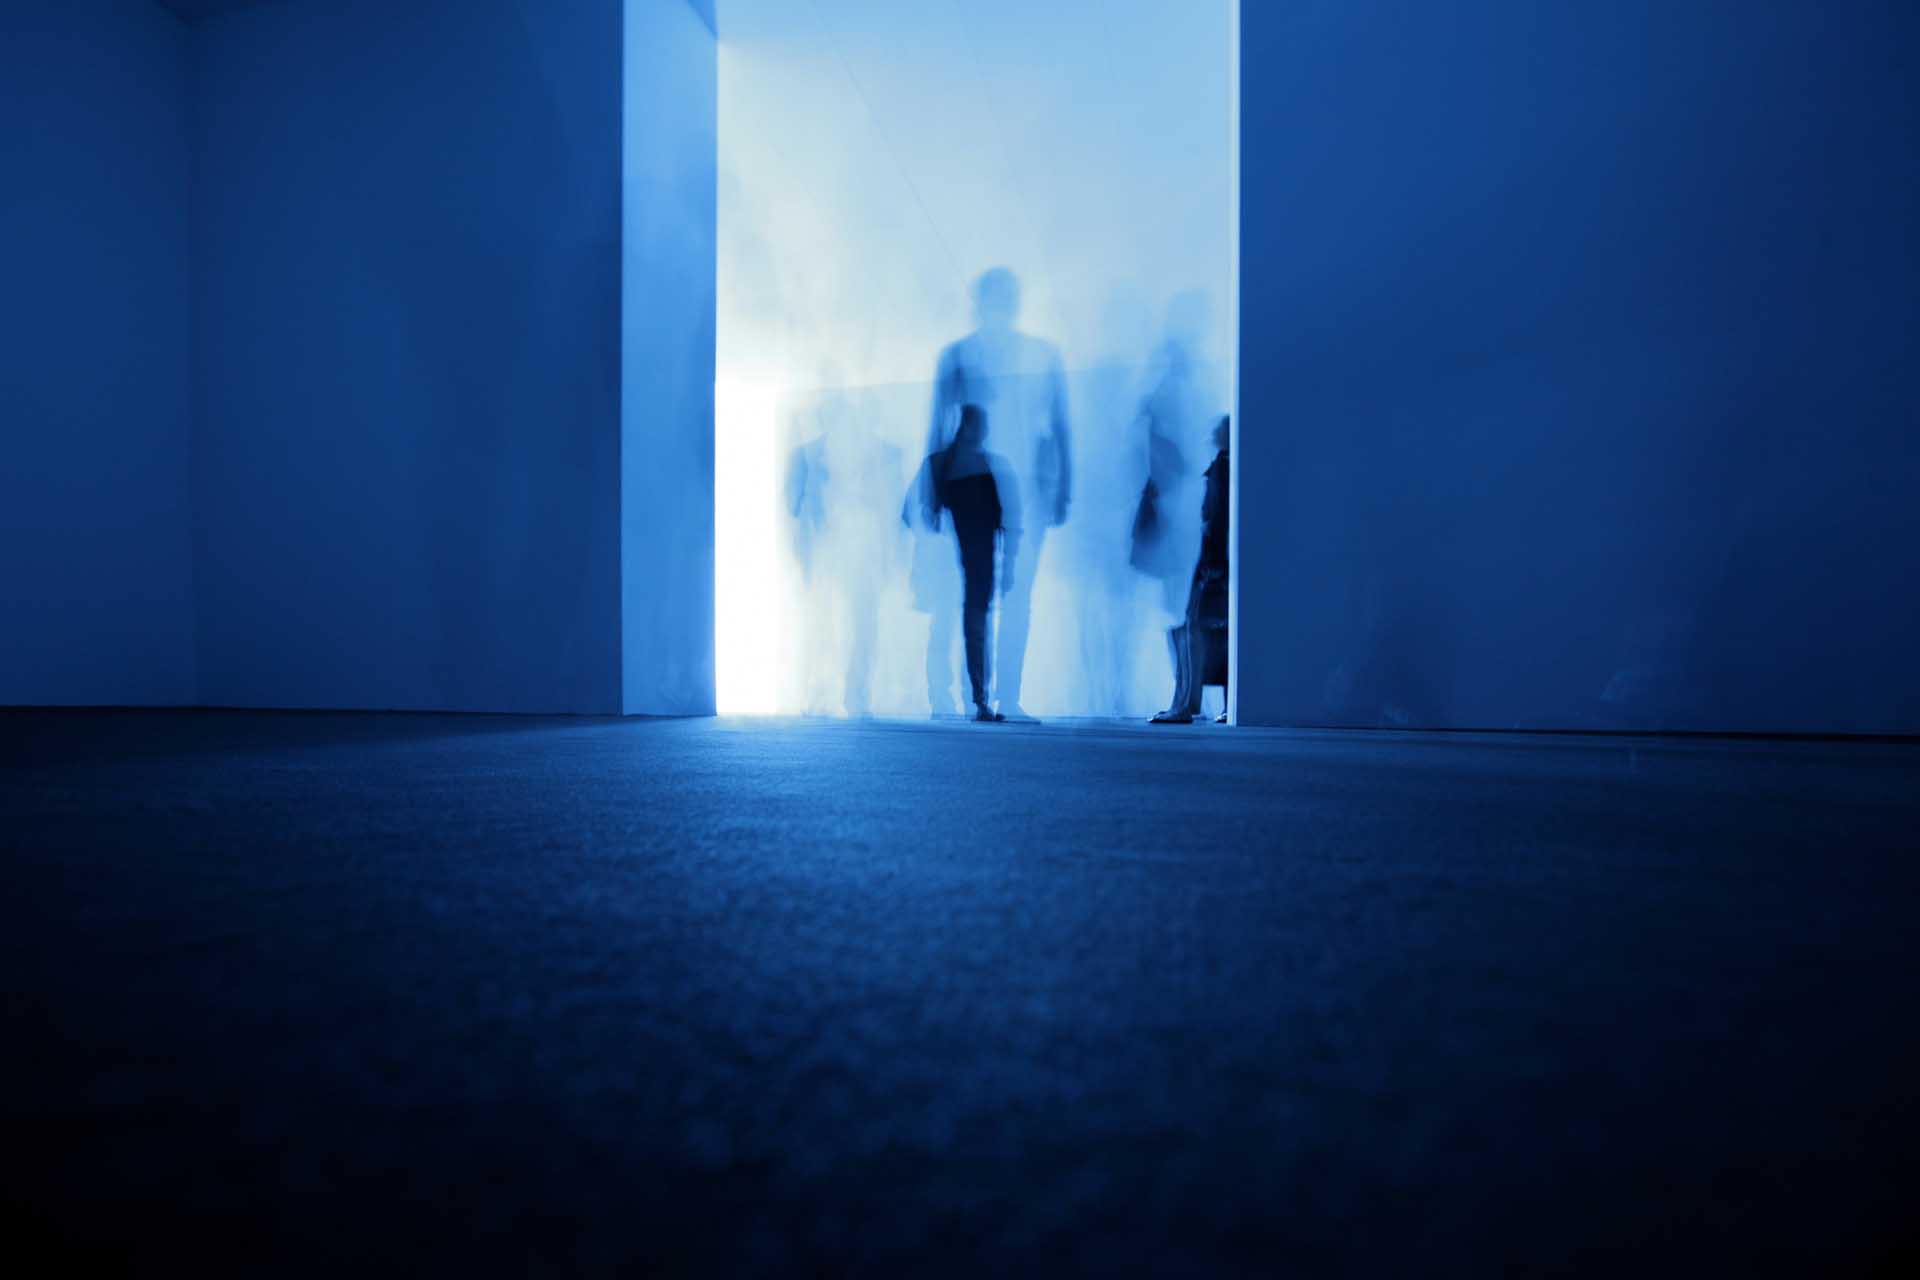 Art Unlimited 42, 2011: Expansive light installation by James Turrell: "Joecar Blue", 1968